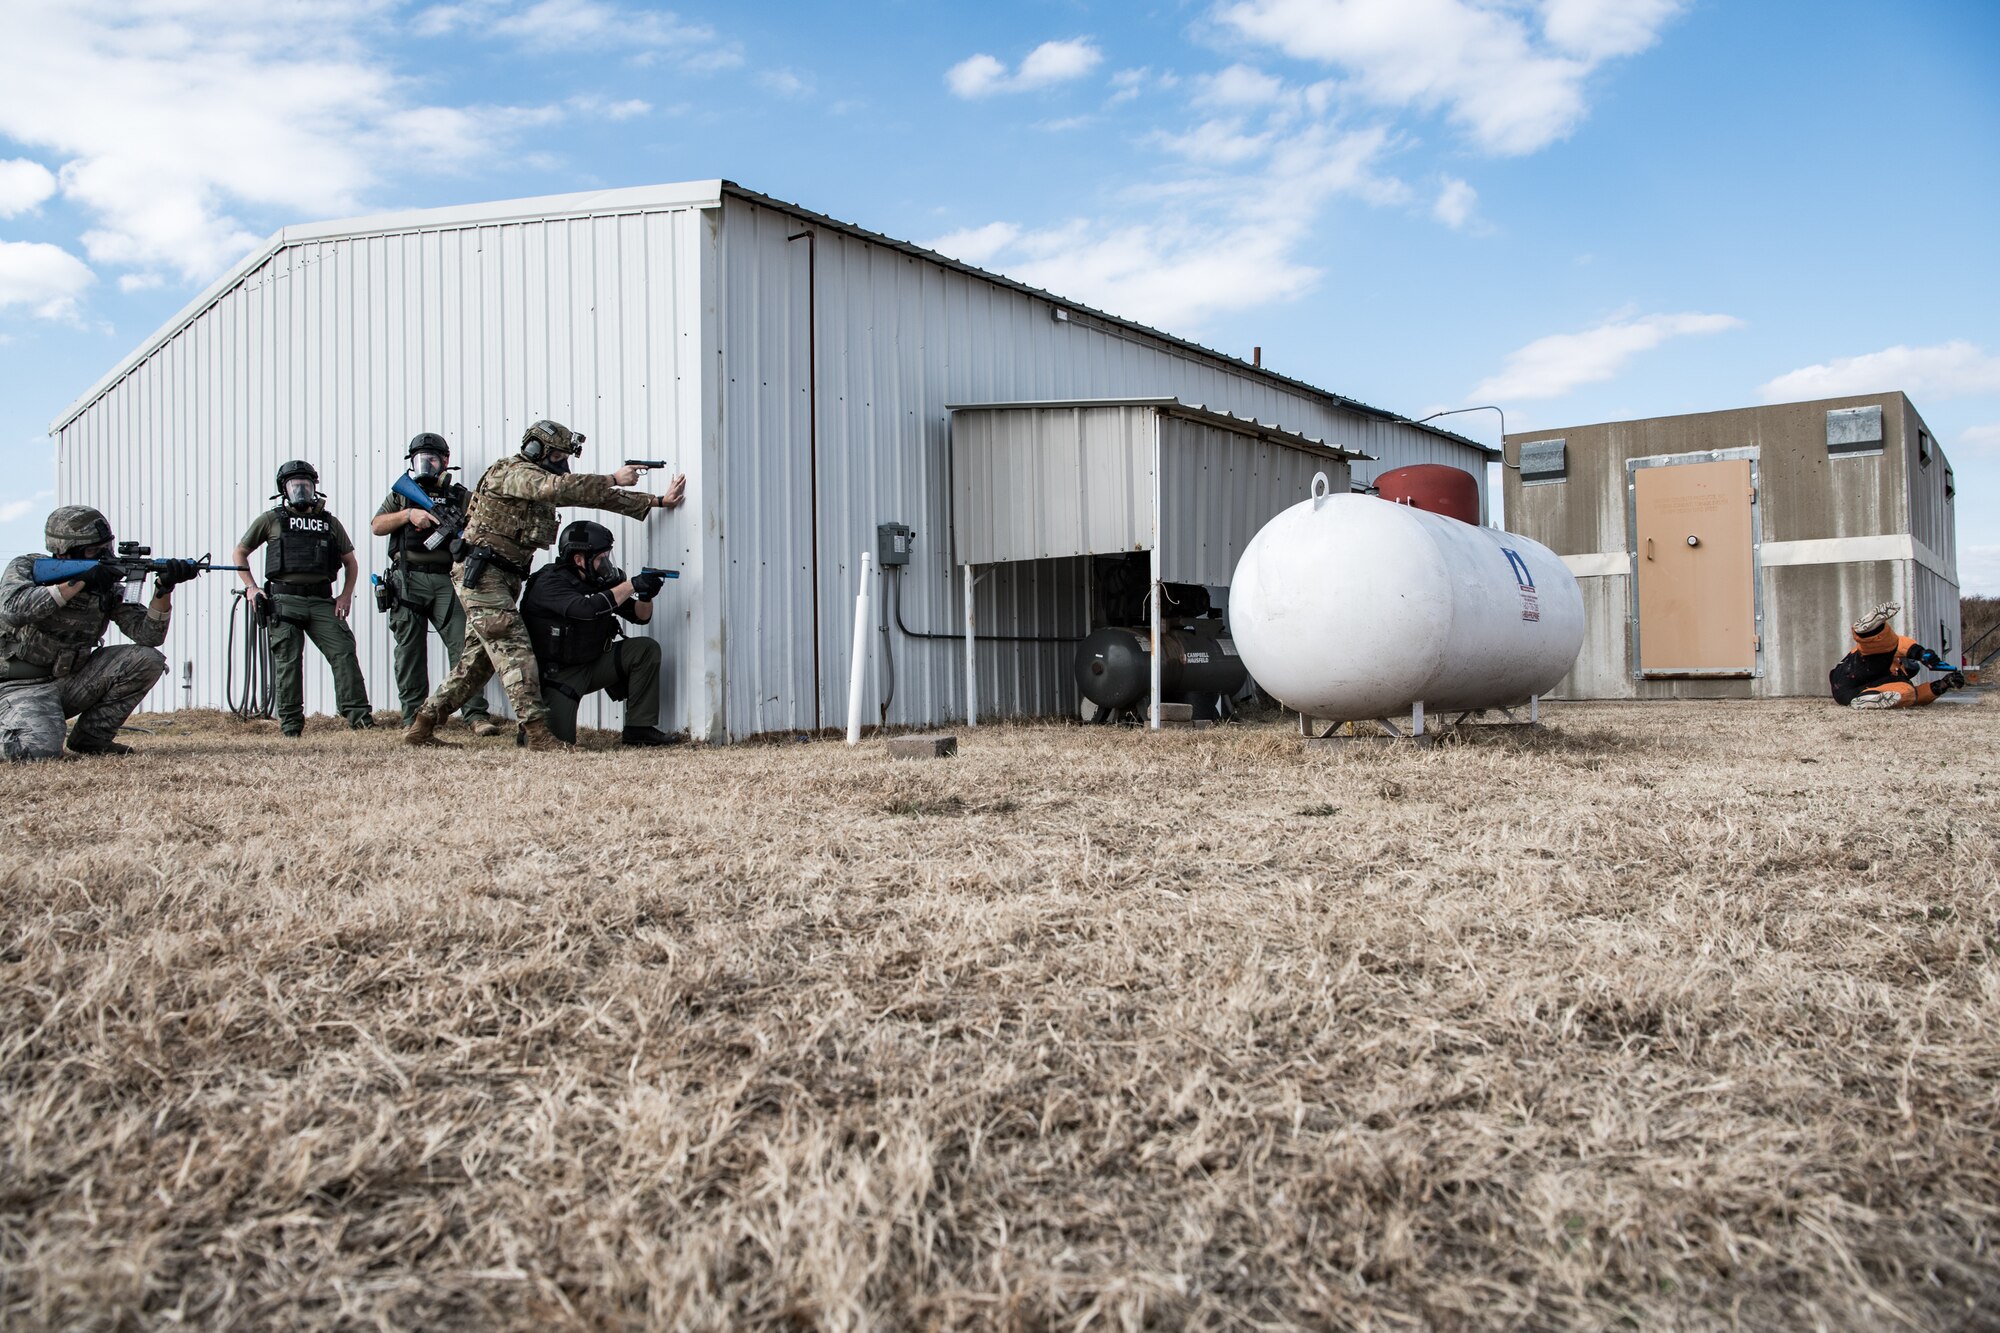 A team of Ardmore Police Department SWAT members and 137th Special Operations Security Forces Squadron Airmen use the end of a building as protection while they simulate engagement with a possible suspect with a gun during SWAT training conducted by the Oklahoma County Sheriff's Office at the OCSO training range in Spencer, Okla., Nov. 4, 2019. (U.S. Air National Guard photo by Staff Sgt. Brigette Waltermire)